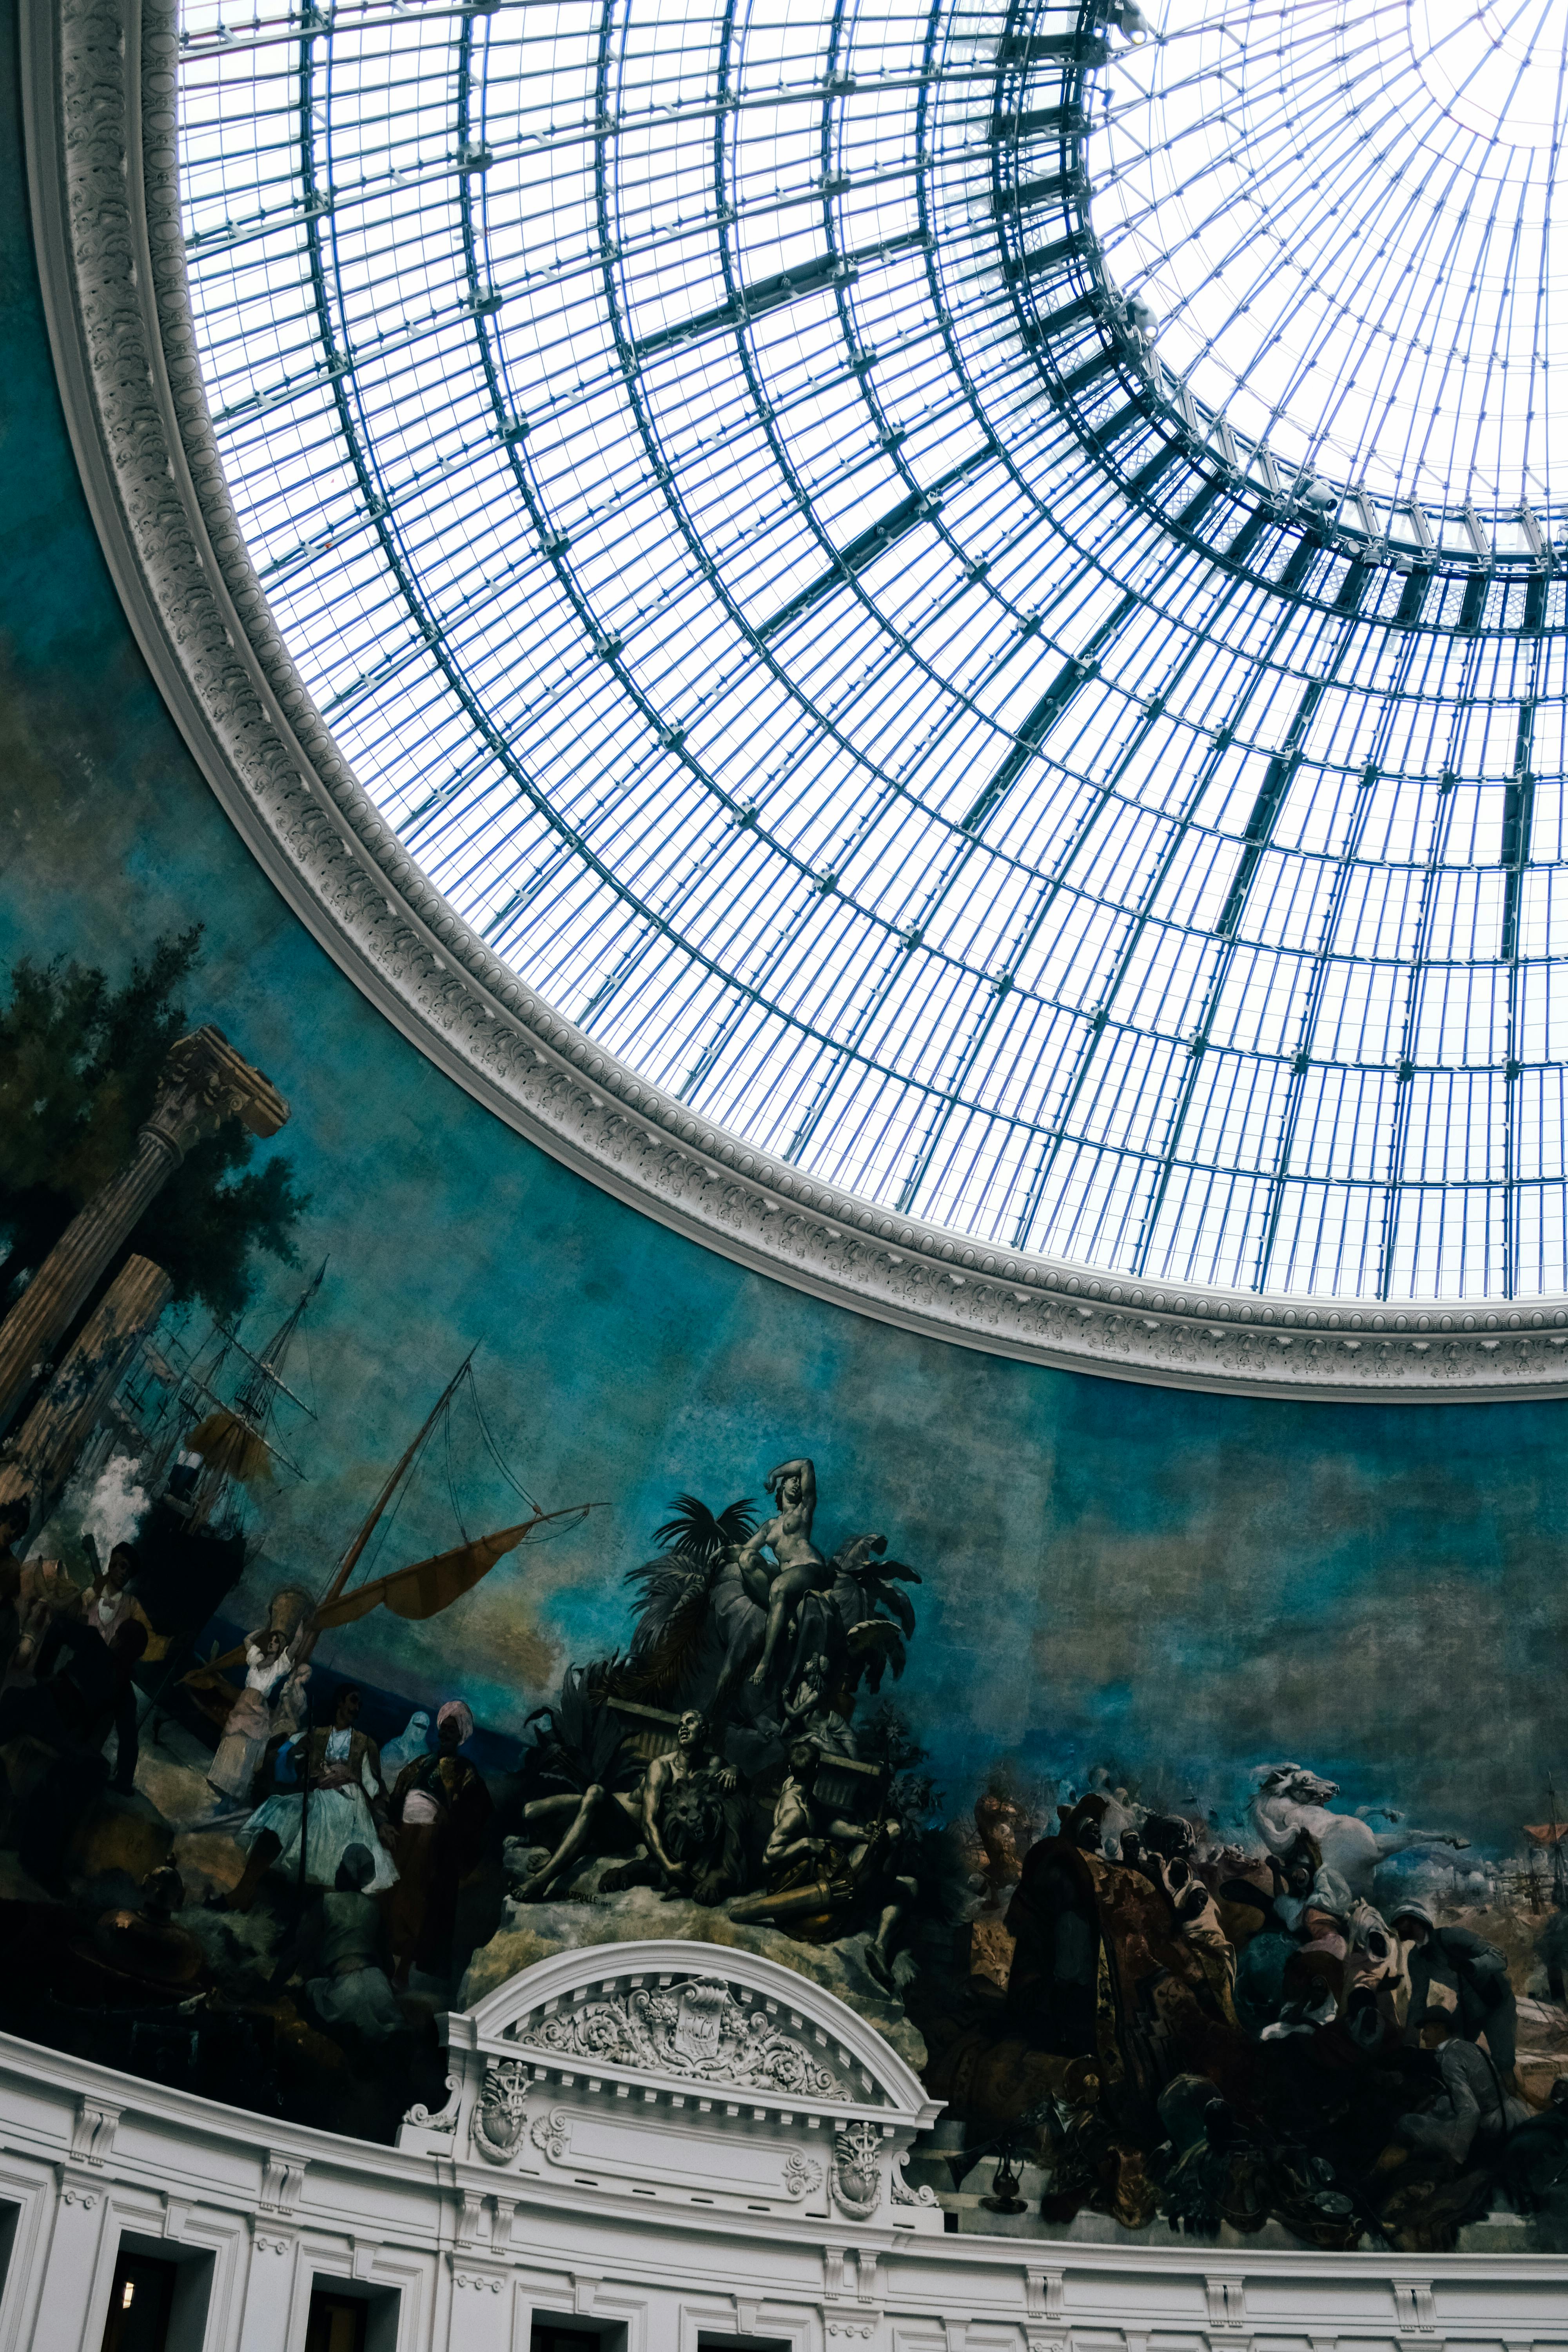 painting under glass ceiling in louvre